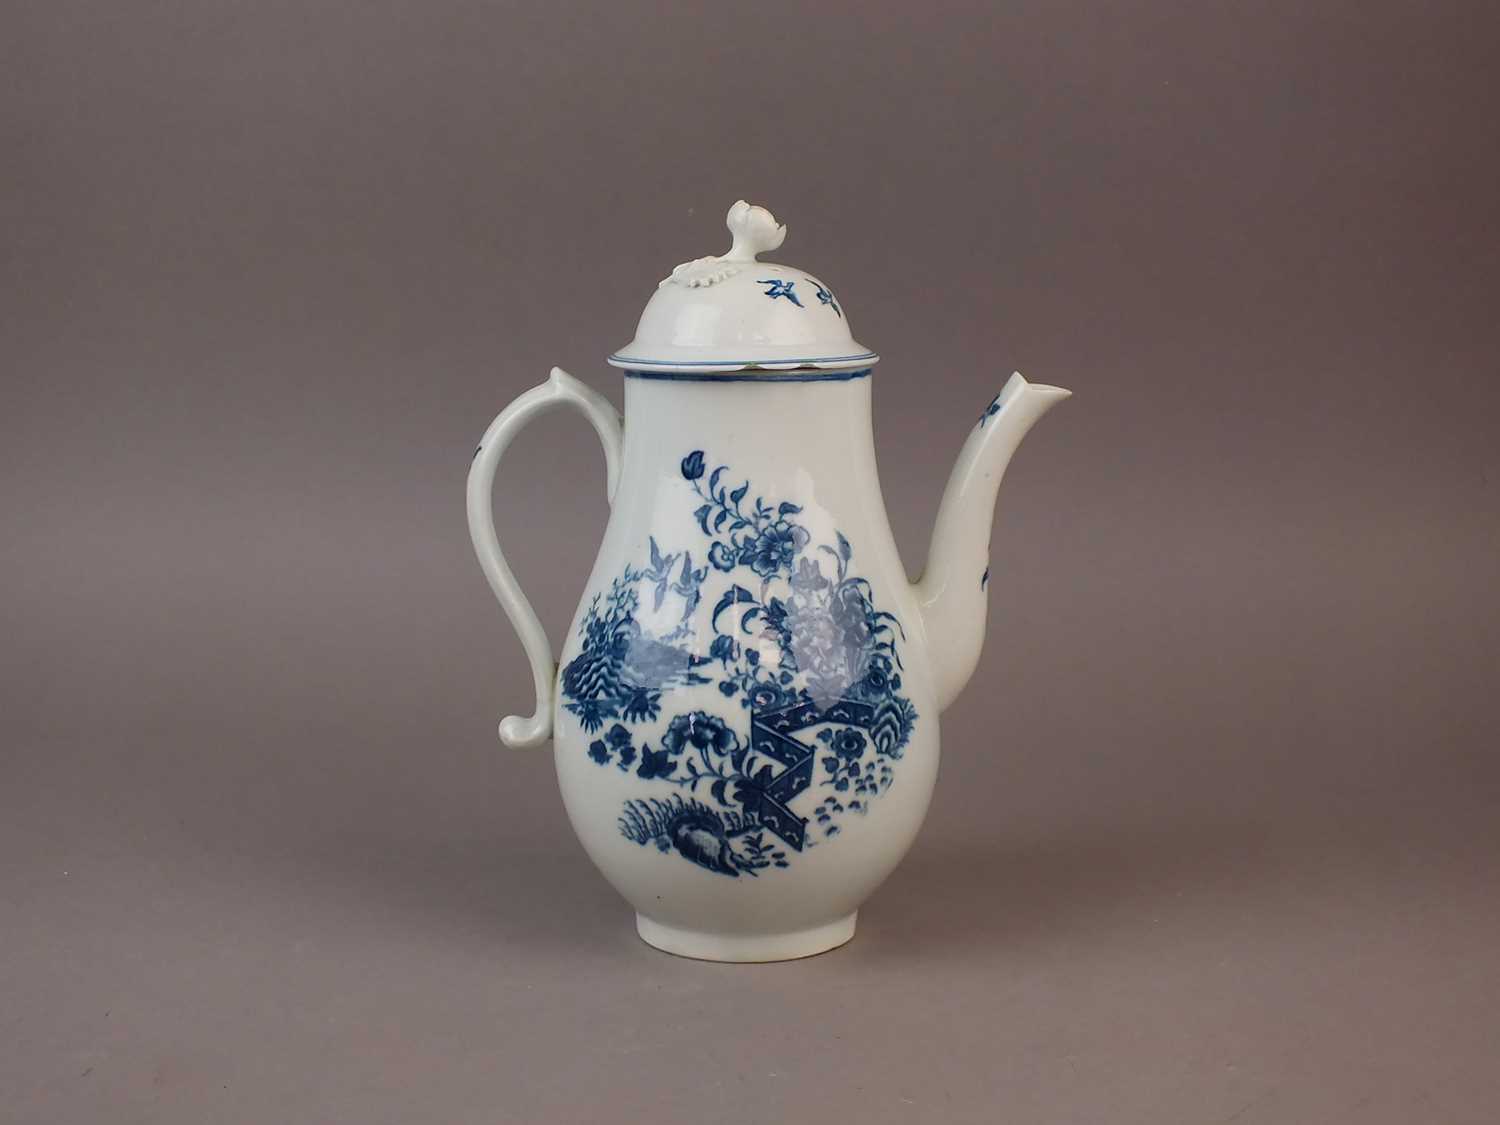 Lot 233 - Caughley 'Fence' coffee pot and cover, circa 1777-90